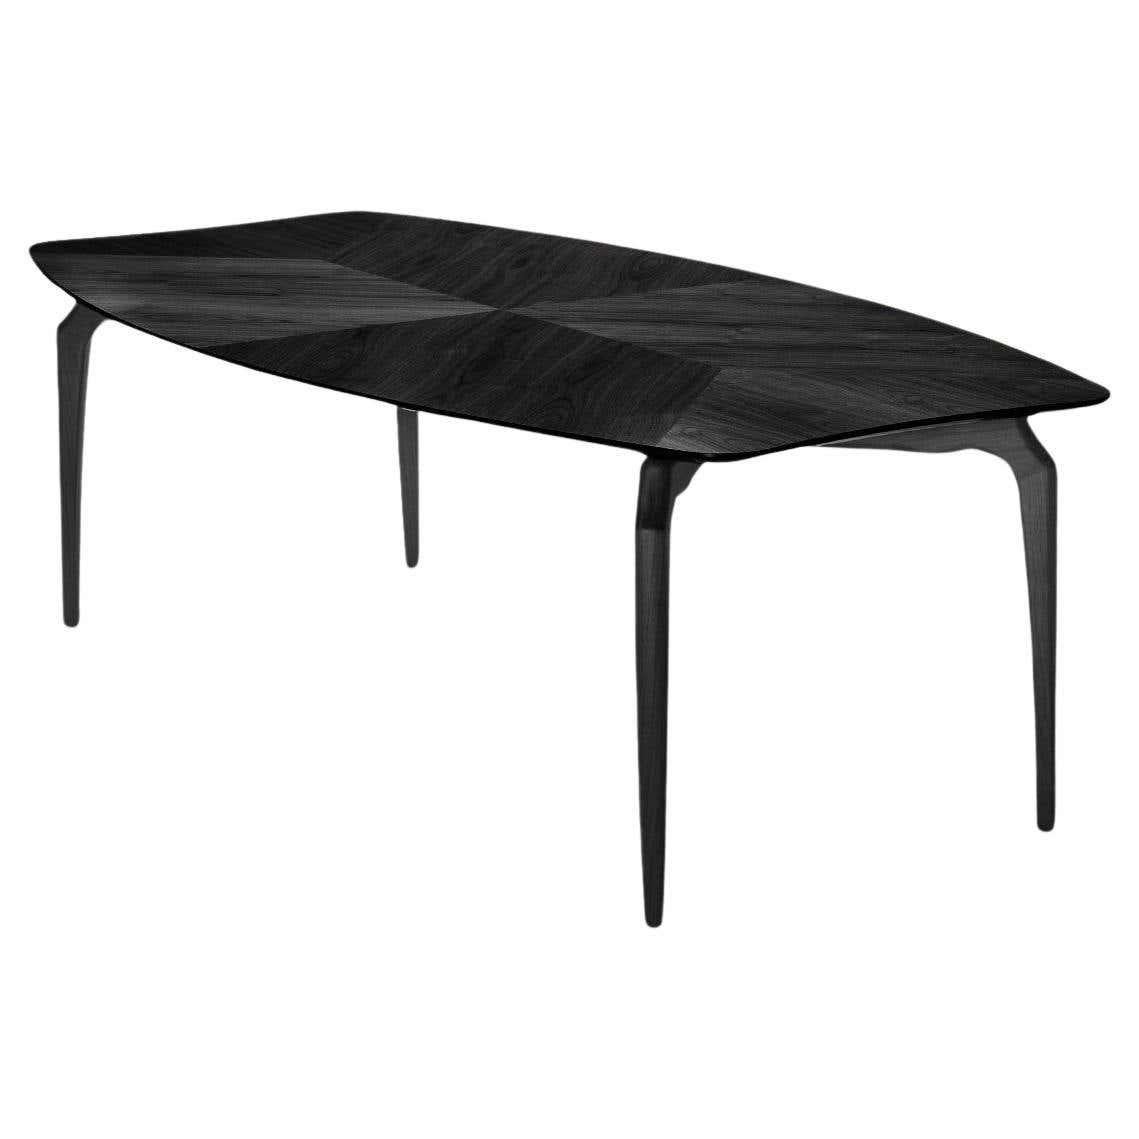 Spanish Oscar Tusquets Table 'Gaulino' Black Stained Wood by BD Barcelona For Sale